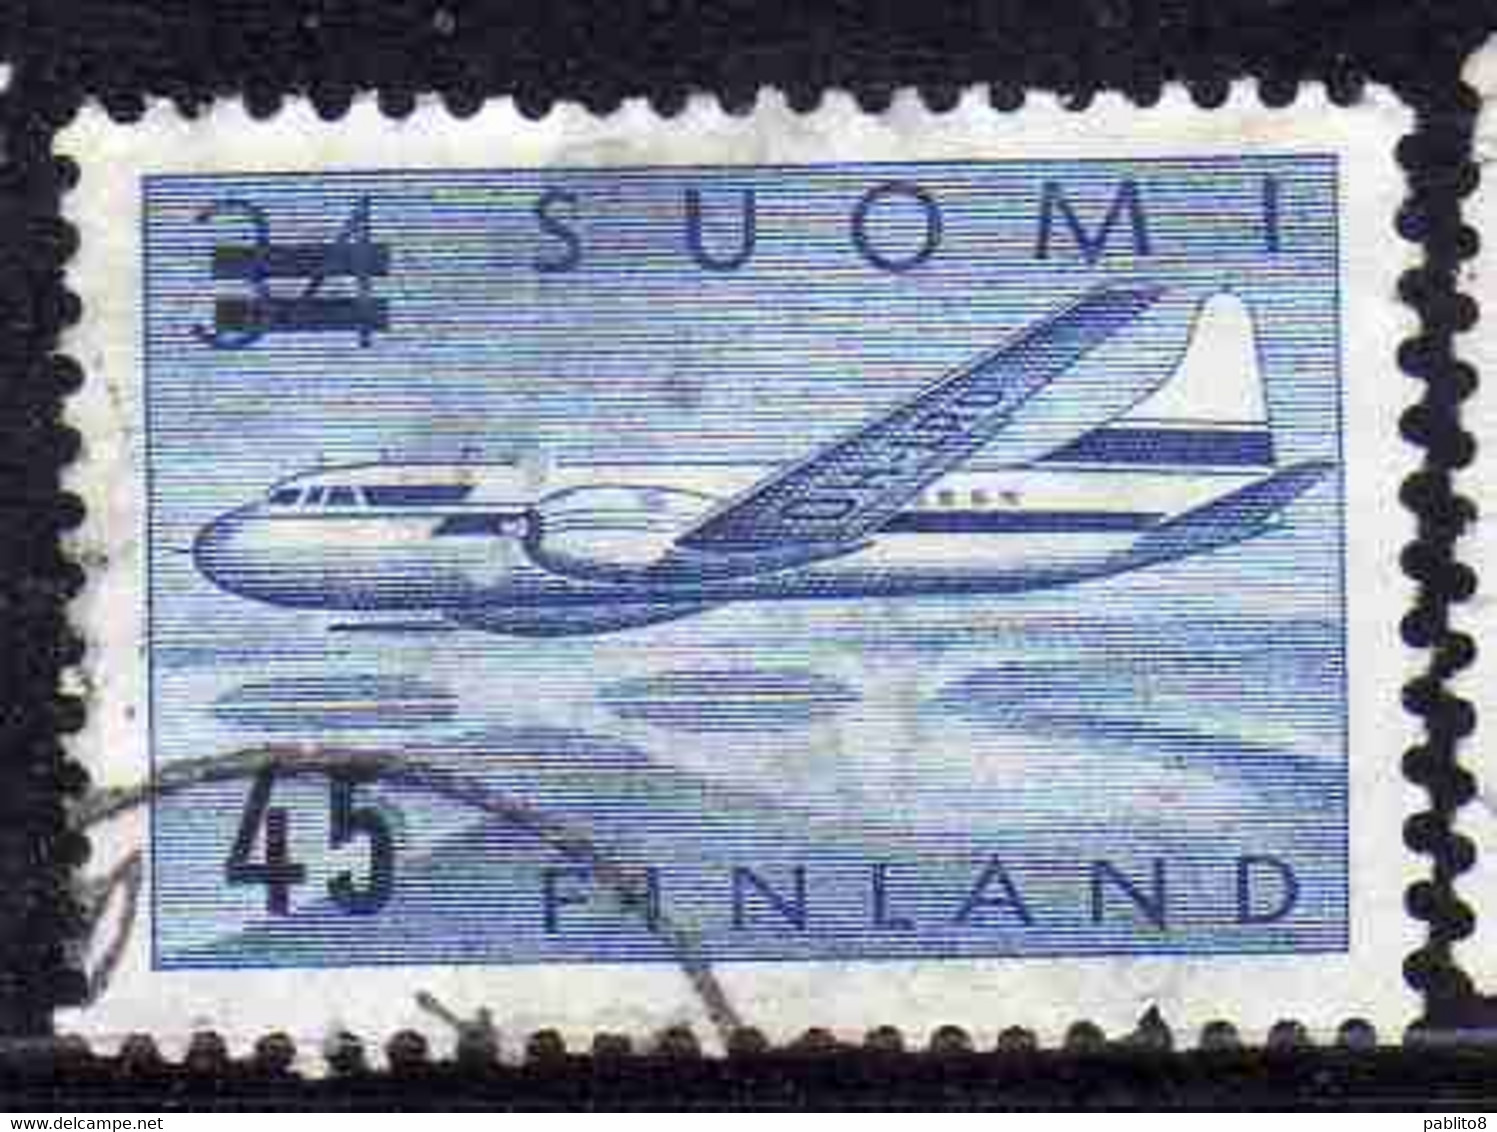 SUOMI FINLAND FINLANDIA FINLANDE 1959 SURCHARGED AIR POST MAIL AIRMAIL CONVAIR OVER LAKES 45 On 34m USED USATO OBLITERE' - Usados